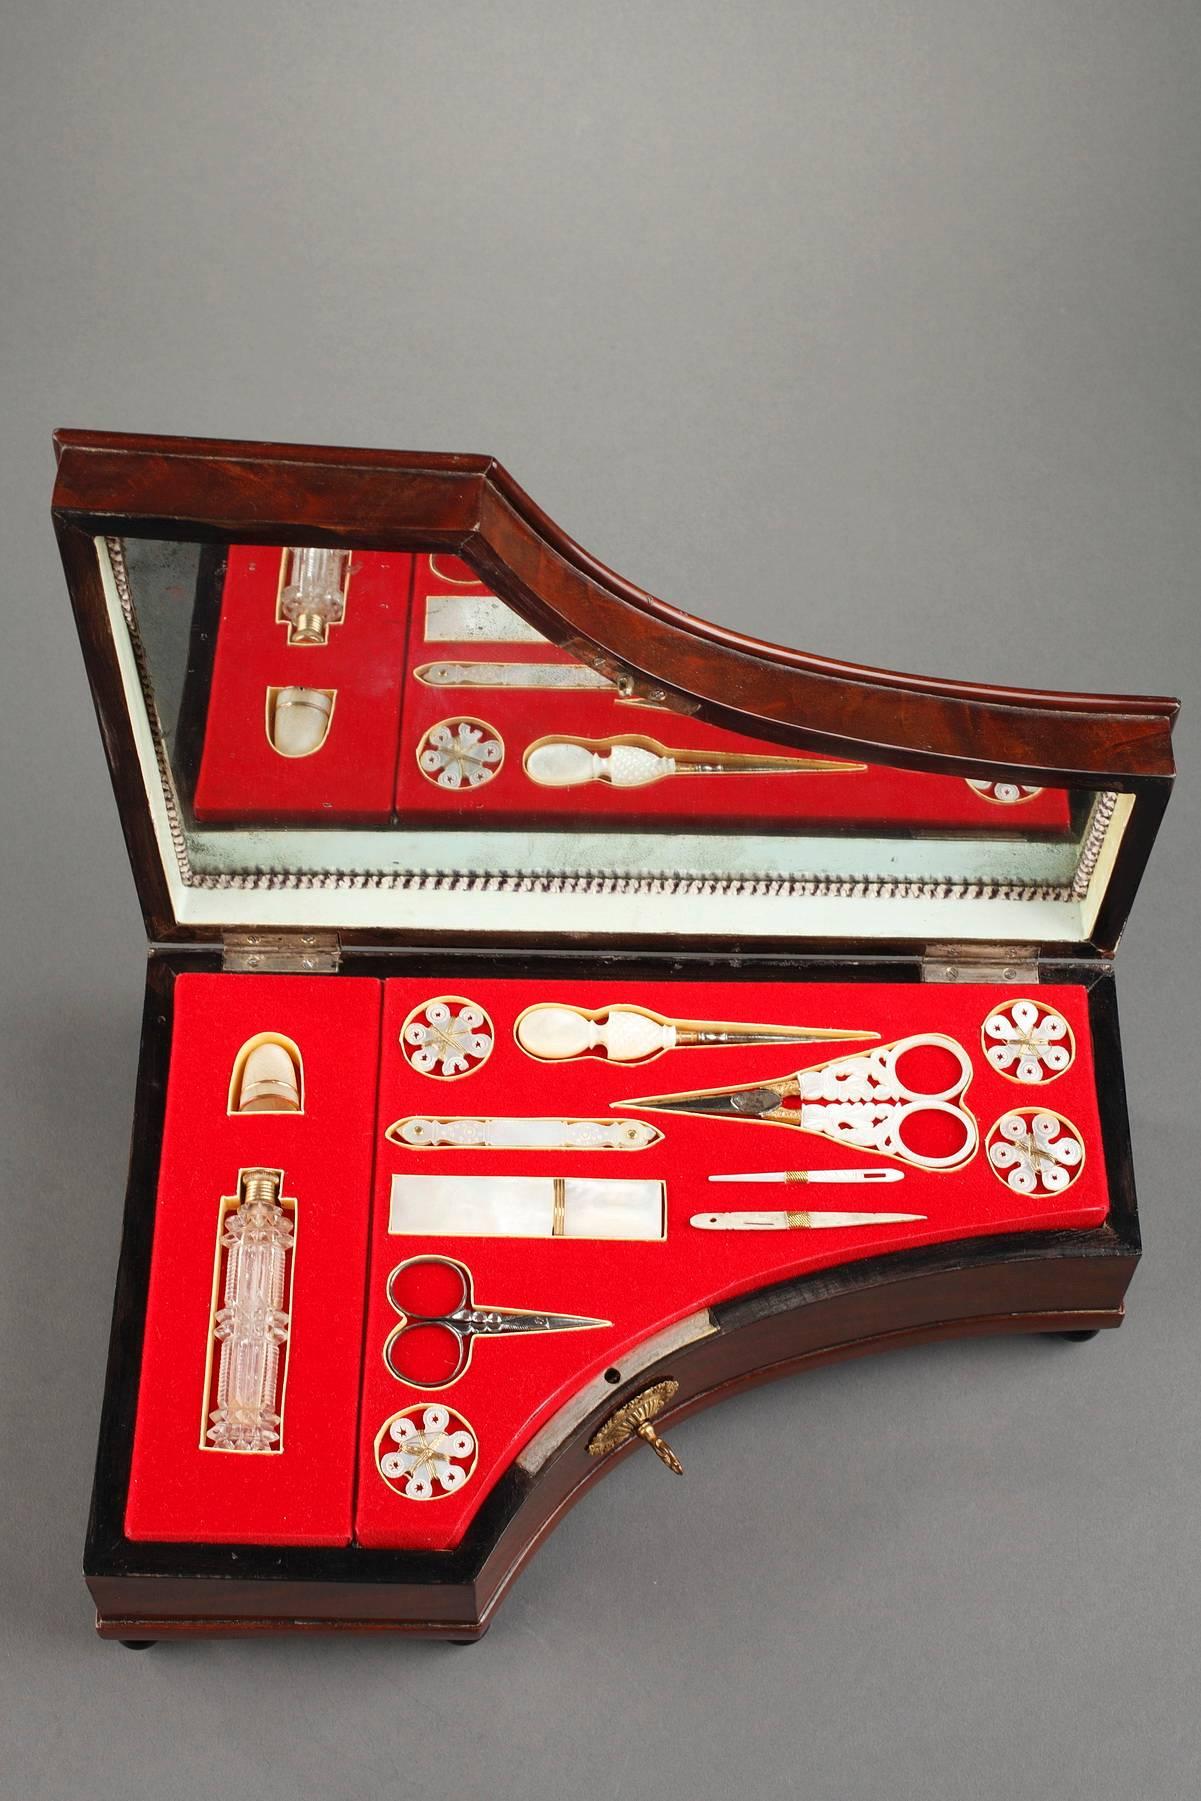 Mahogany sewing box in the shape of a grand piano, with a hidden music box. Inside the box is a set of beautiful mother-of-pearl sewing instruments fitted into red velvet.

In the 18th century, the notion of toiletry essentials or the 